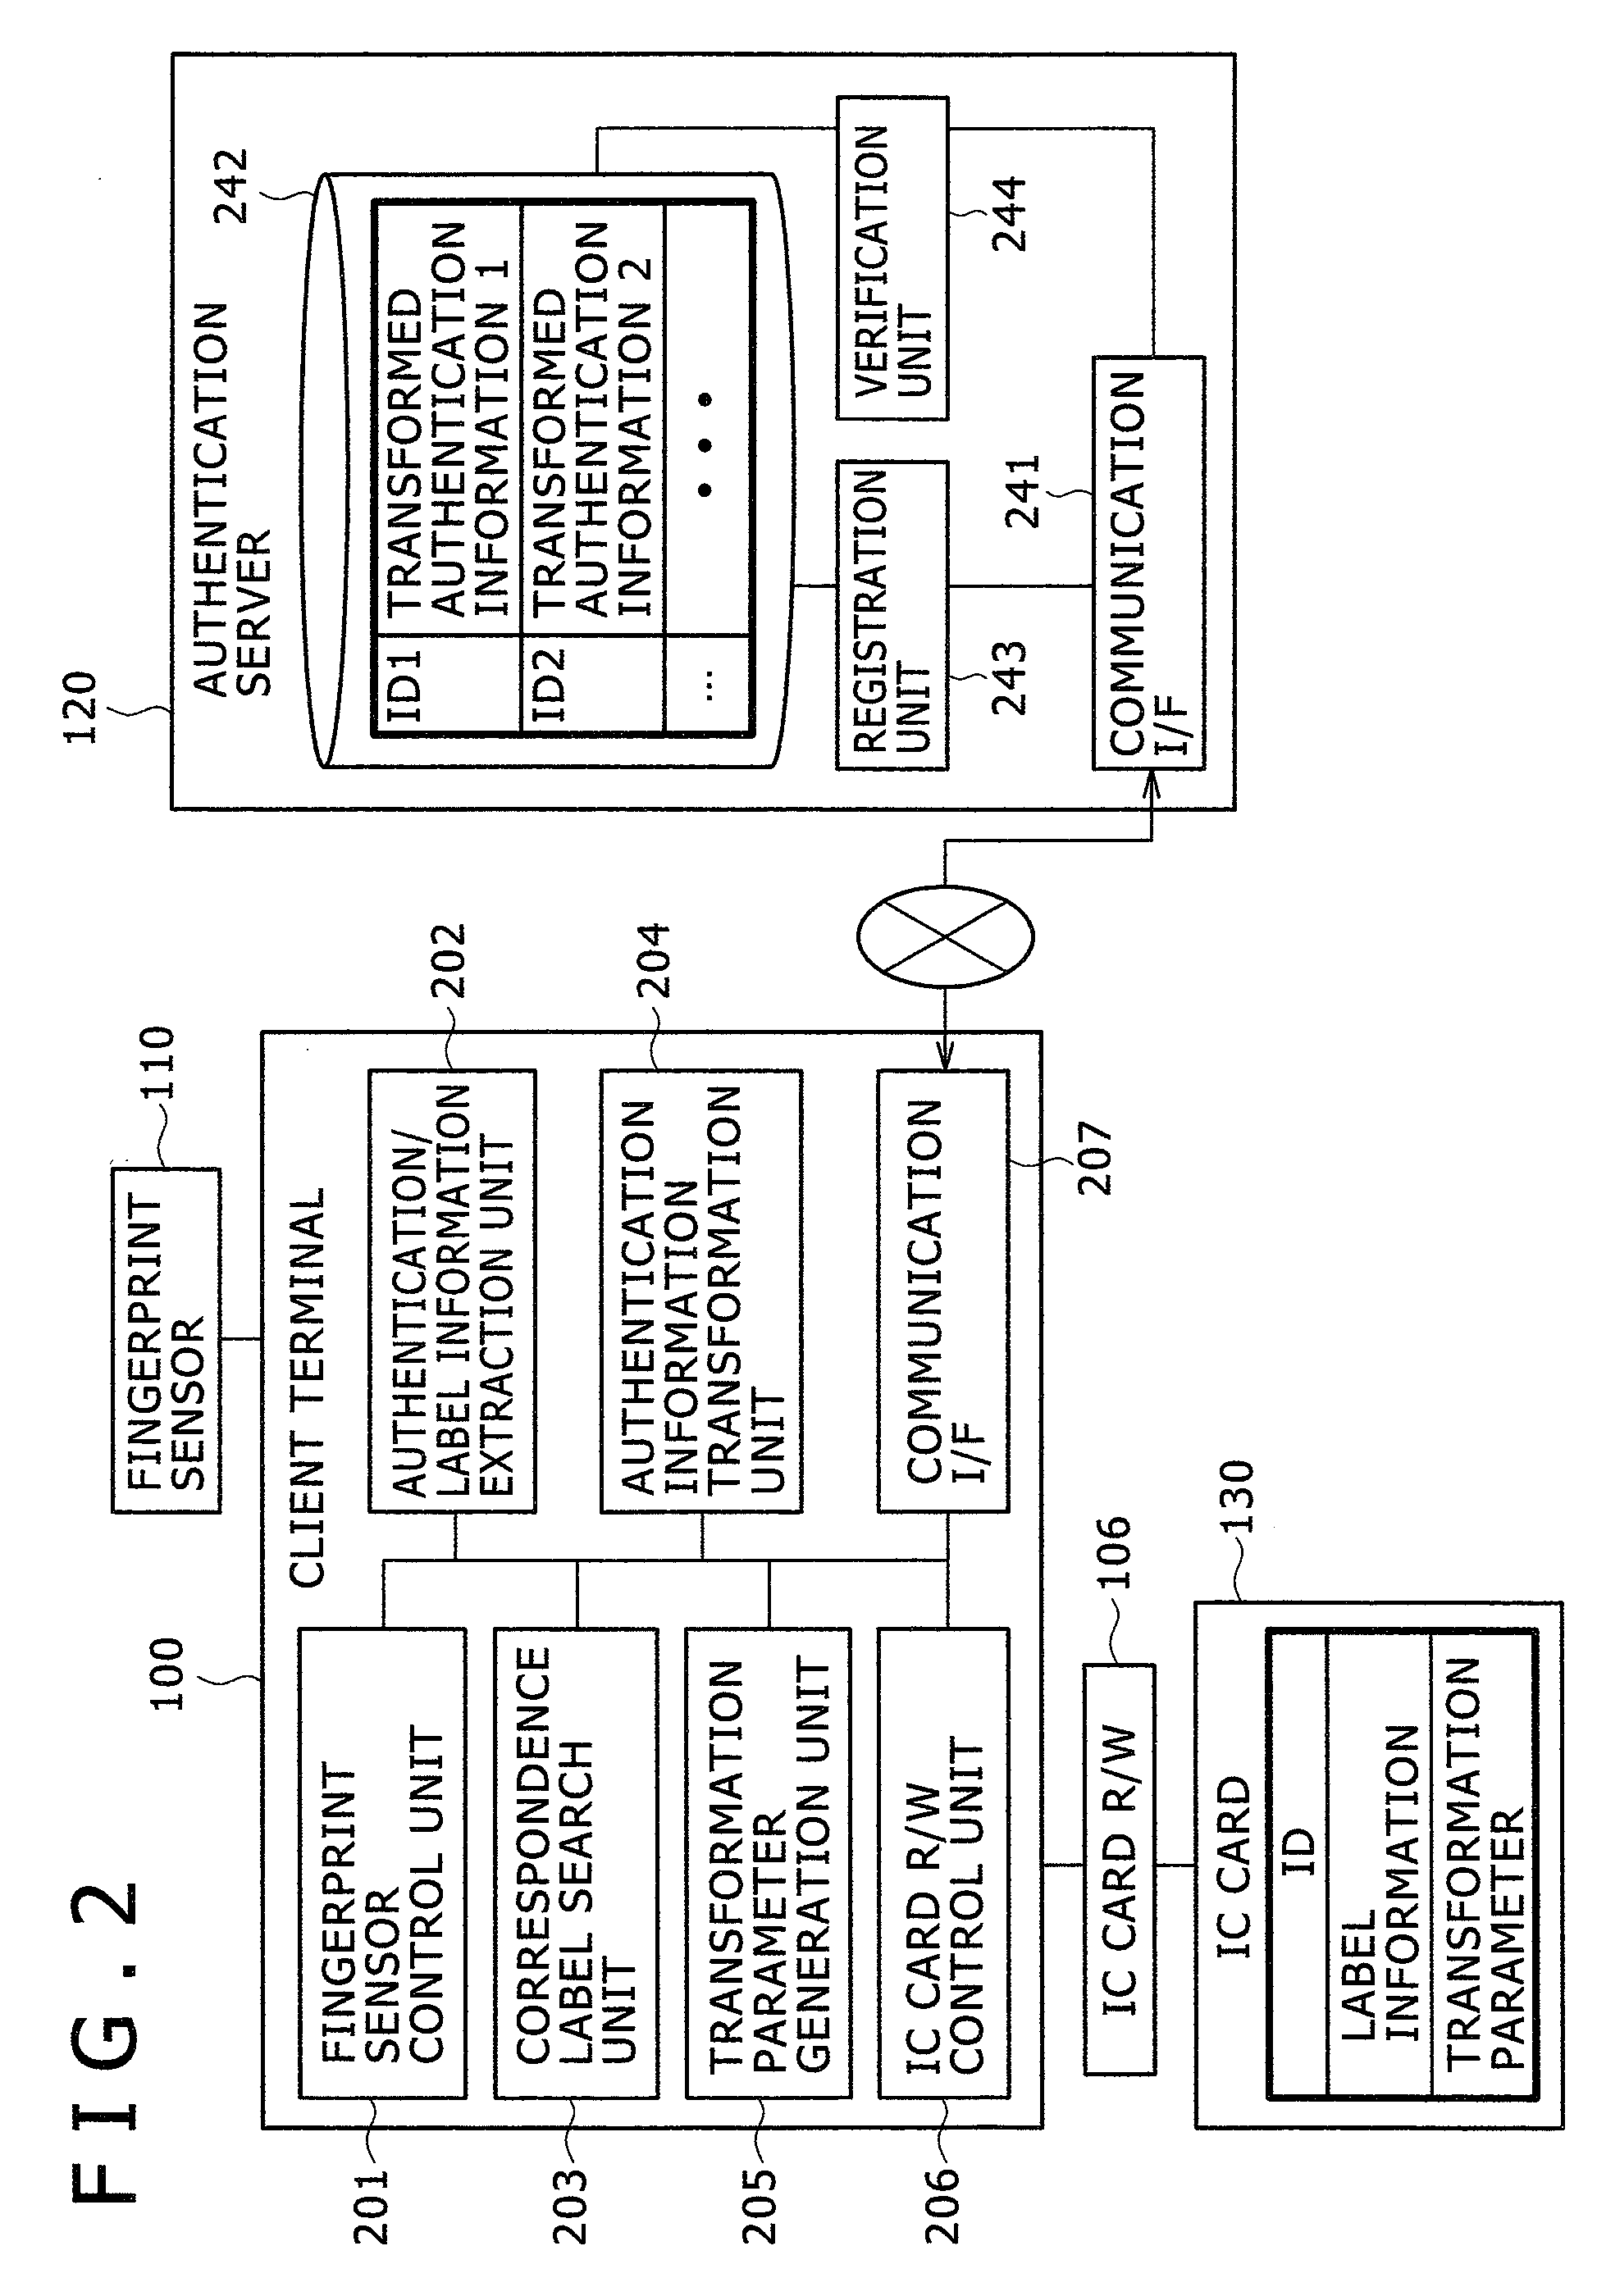 Method, system and program for authenticating a user by biometric information